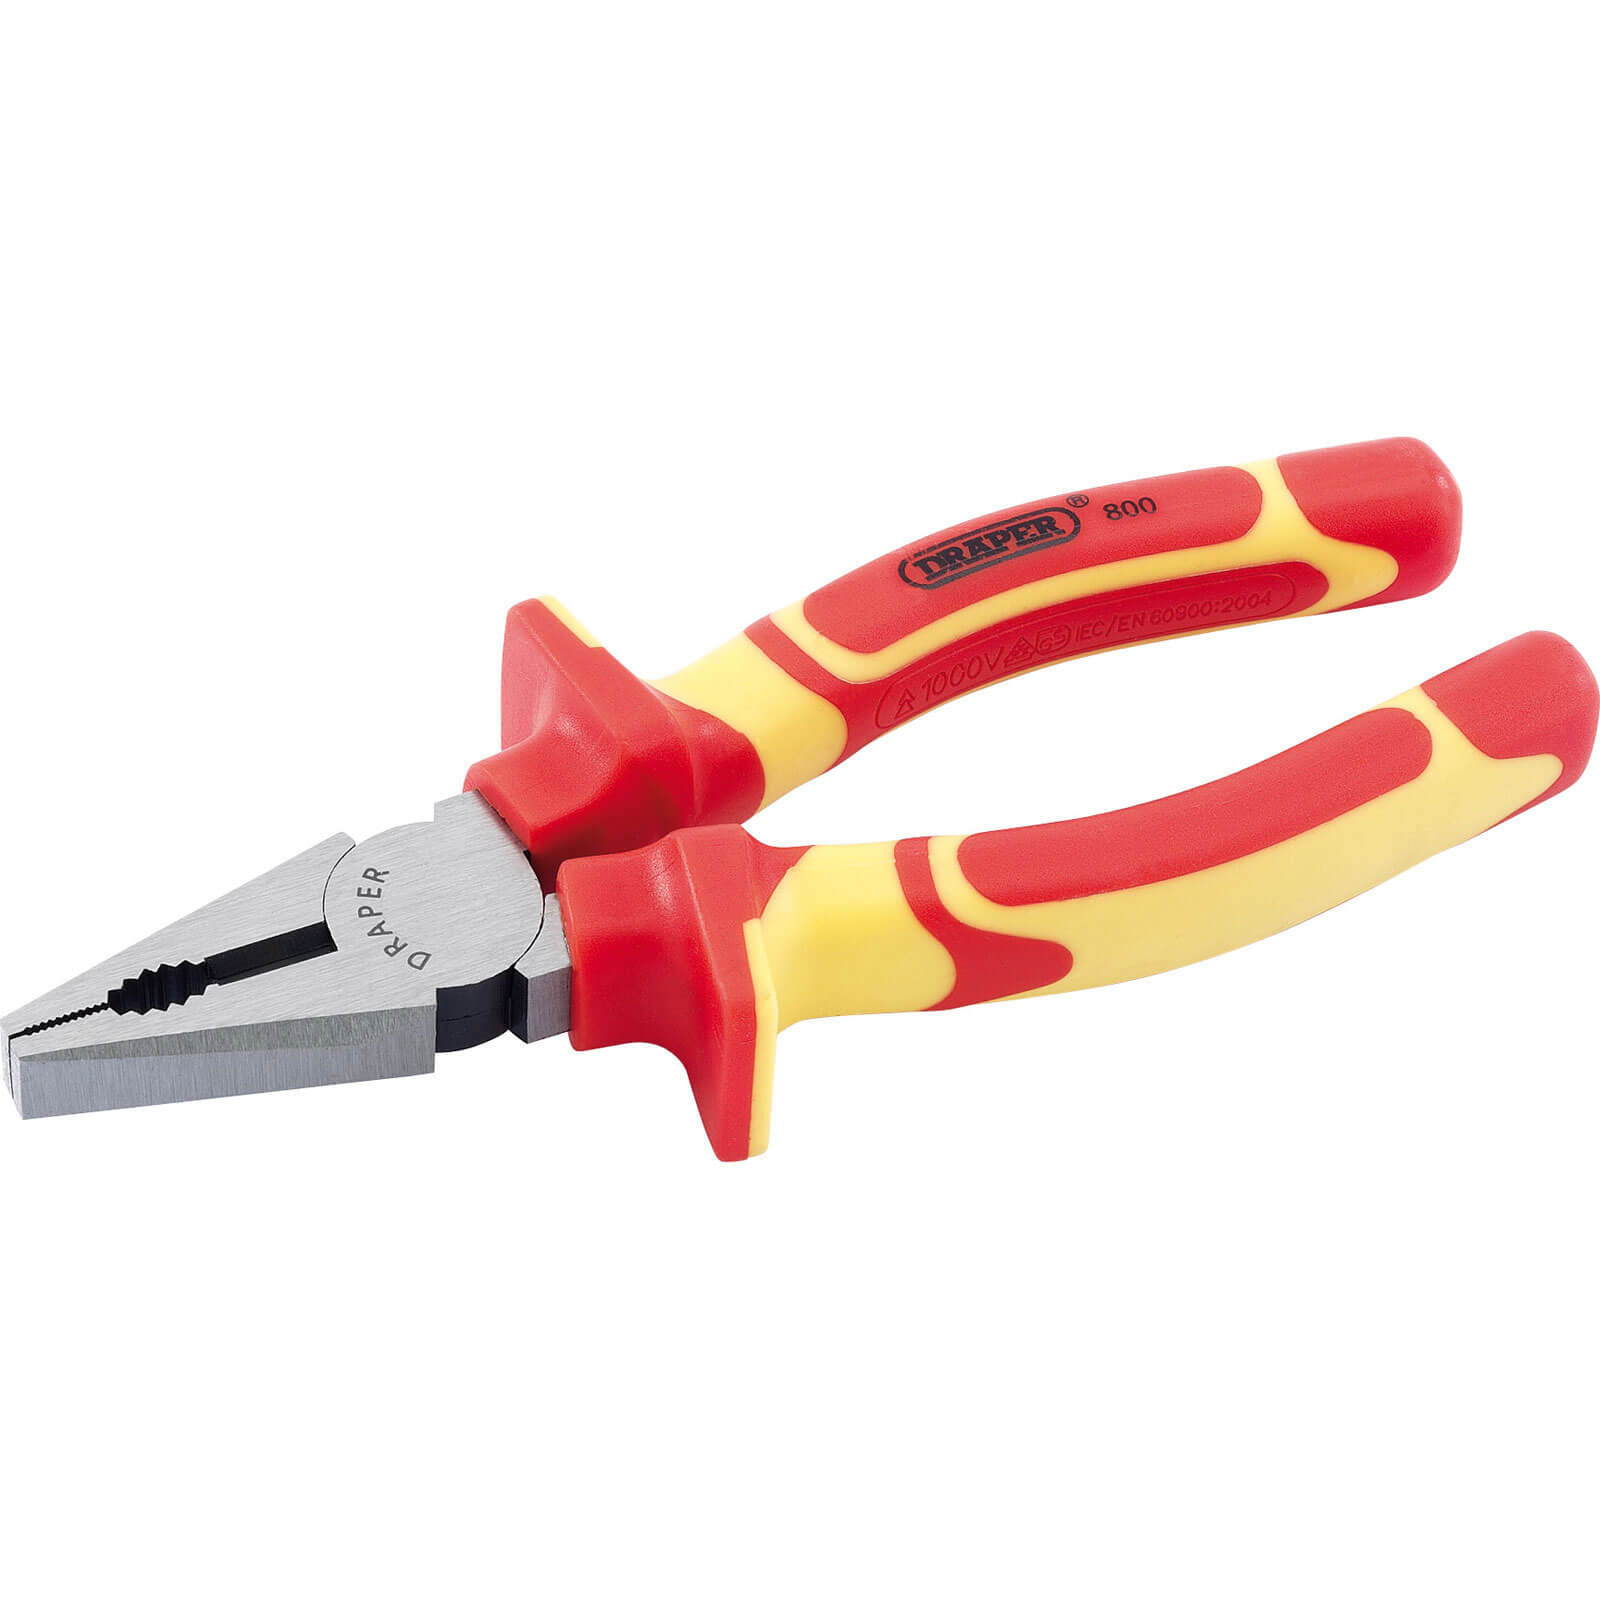 Photo of Draper Vde Insulated Combination Pliers 160mm